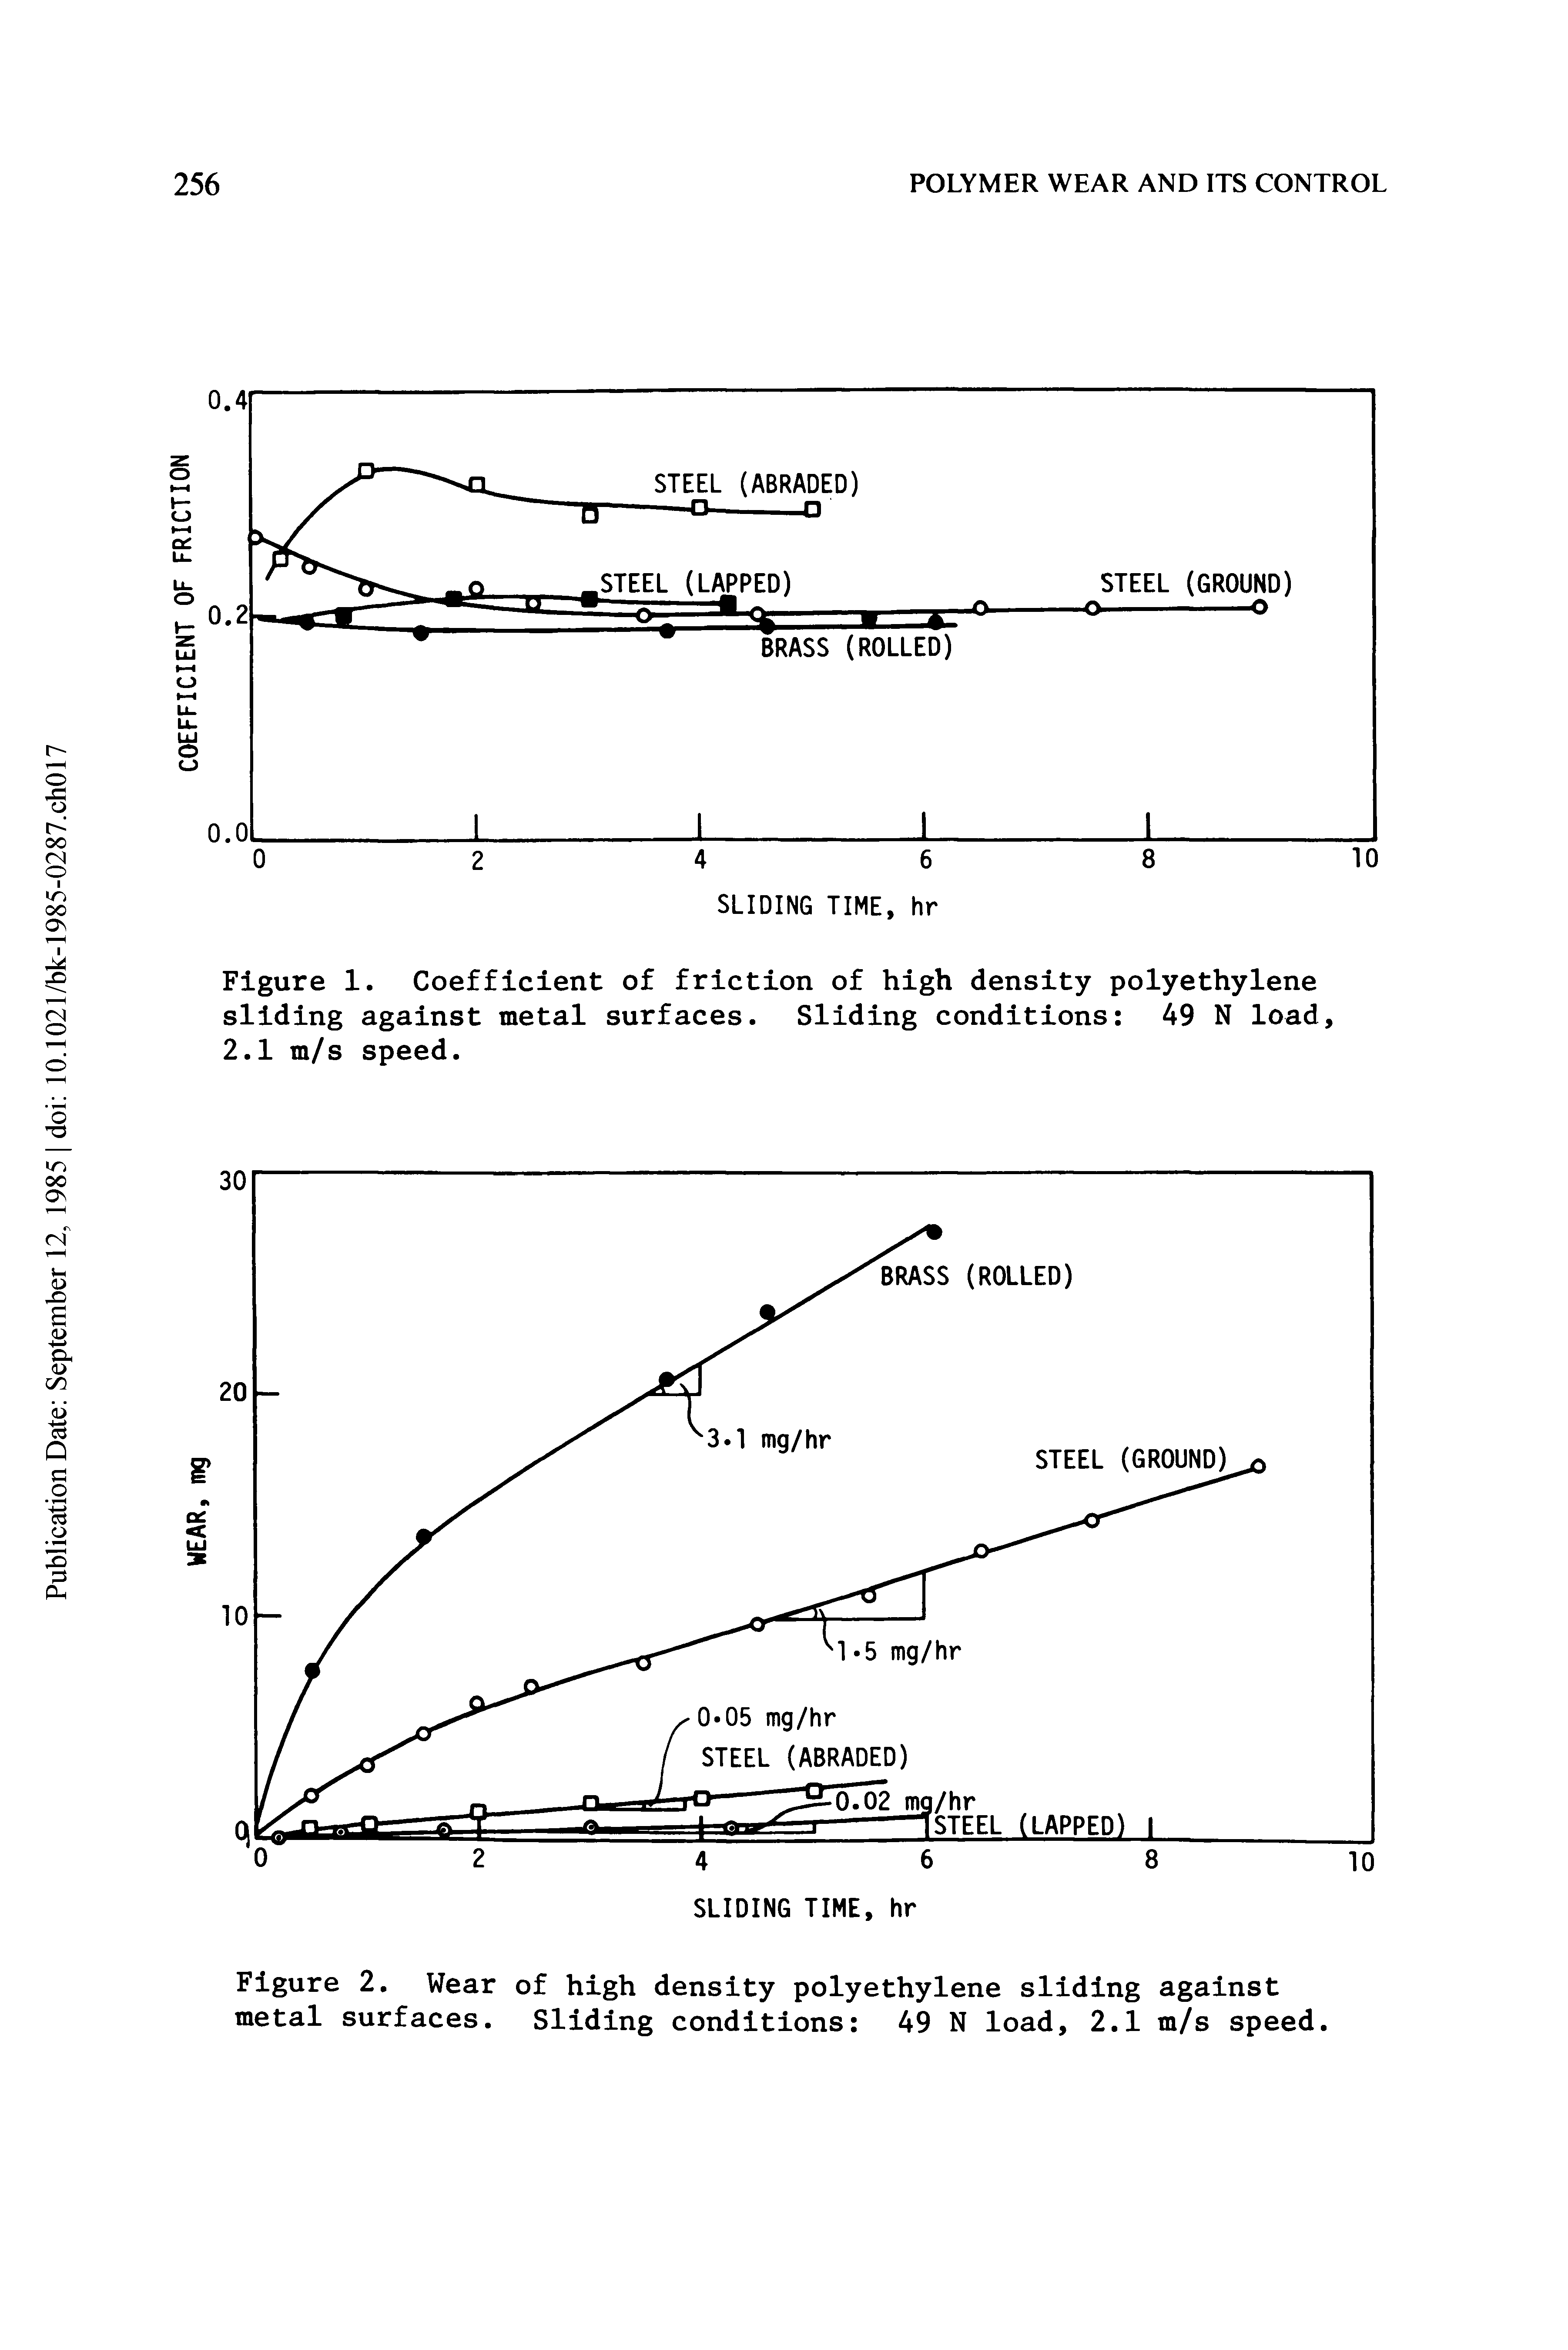 Figure 1. Coefficient of friction of high density polyethylene sliding against metal surfaces. Sliding conditions 49 N load, 2.1 m/s speed.